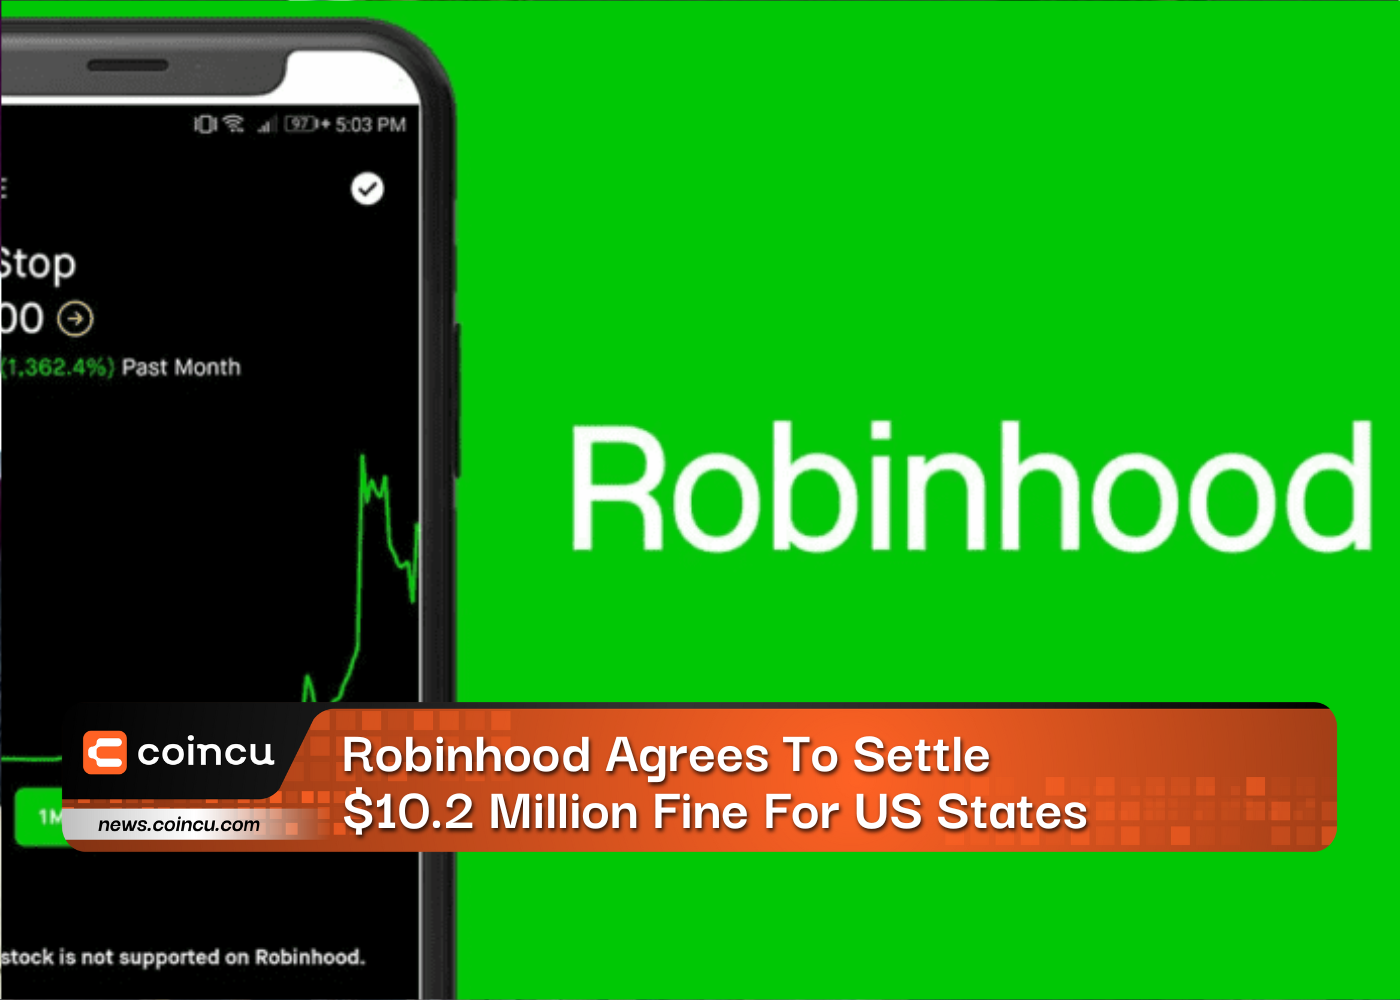 Robinhood Agrees To Settle $10.2 Million Fine For US States